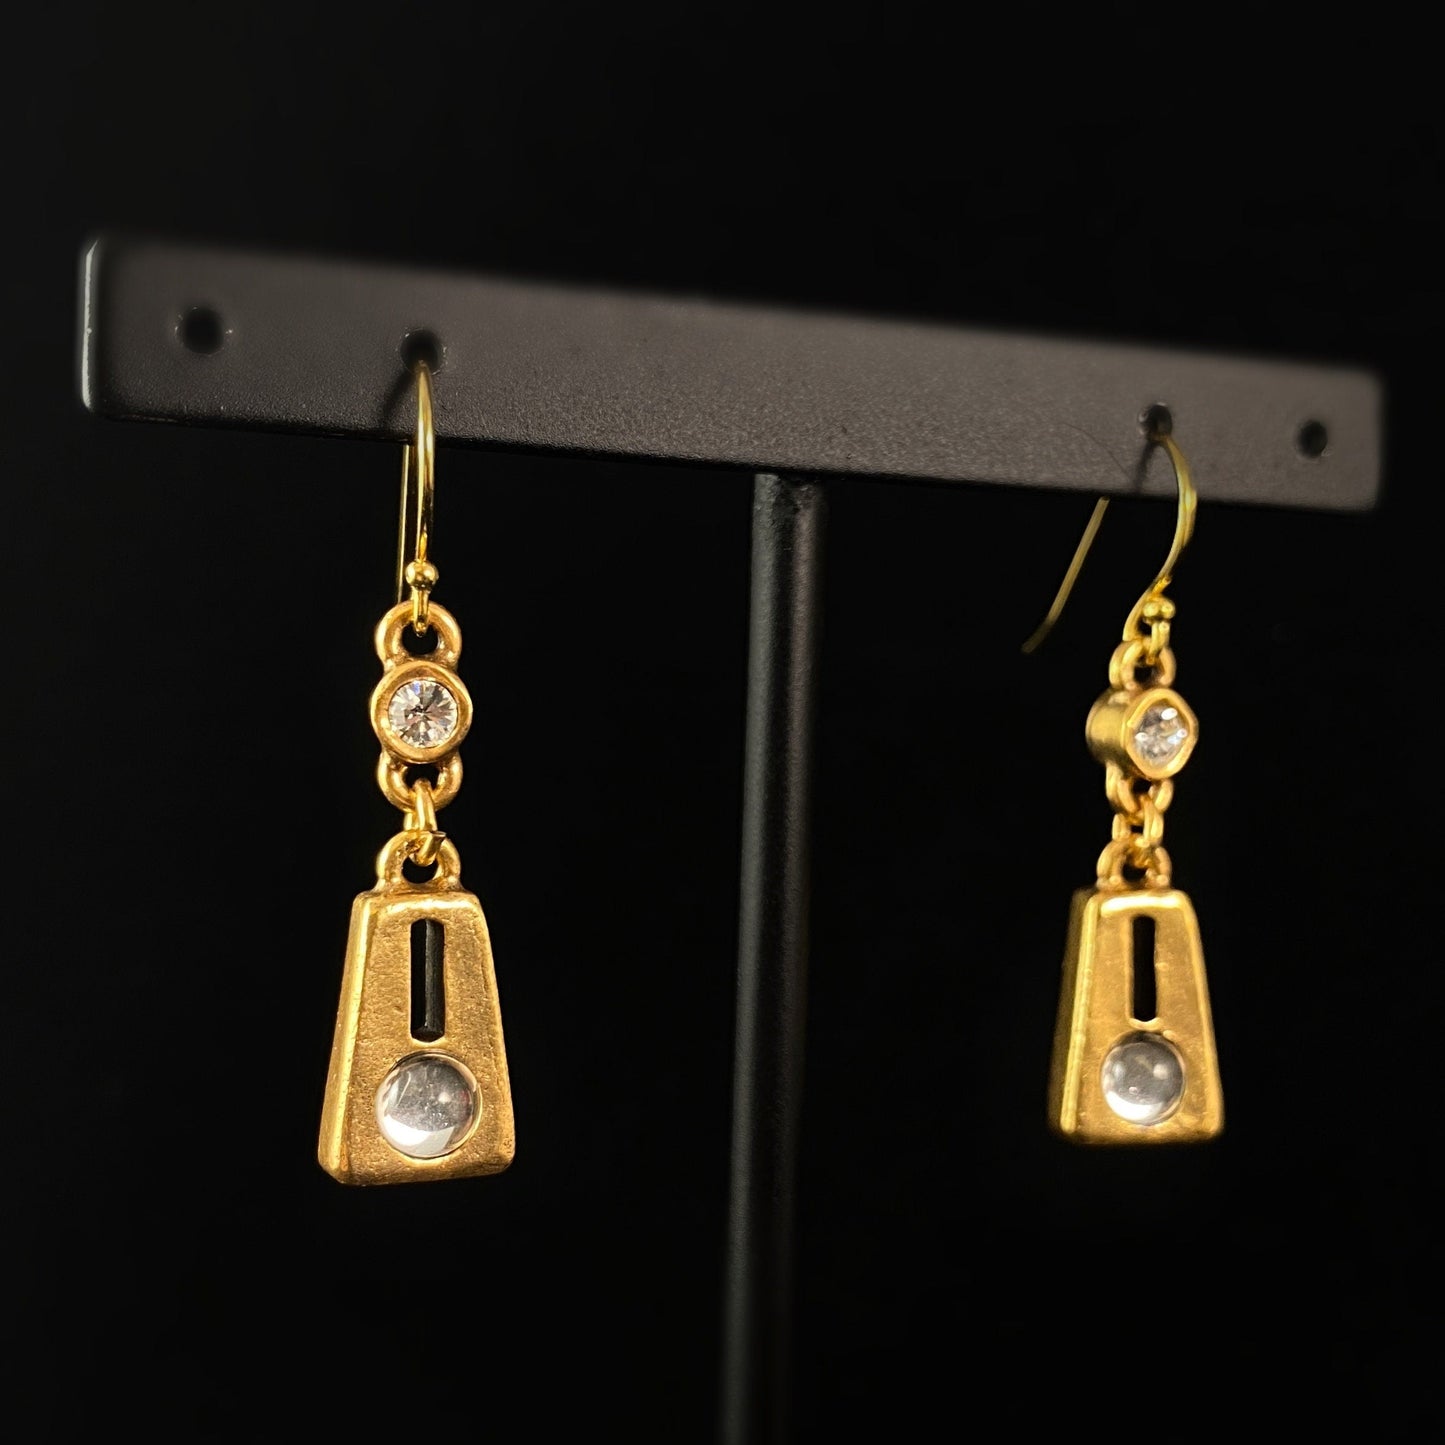 Handmade Gold Rectangle Earrings with Crystals - Kate